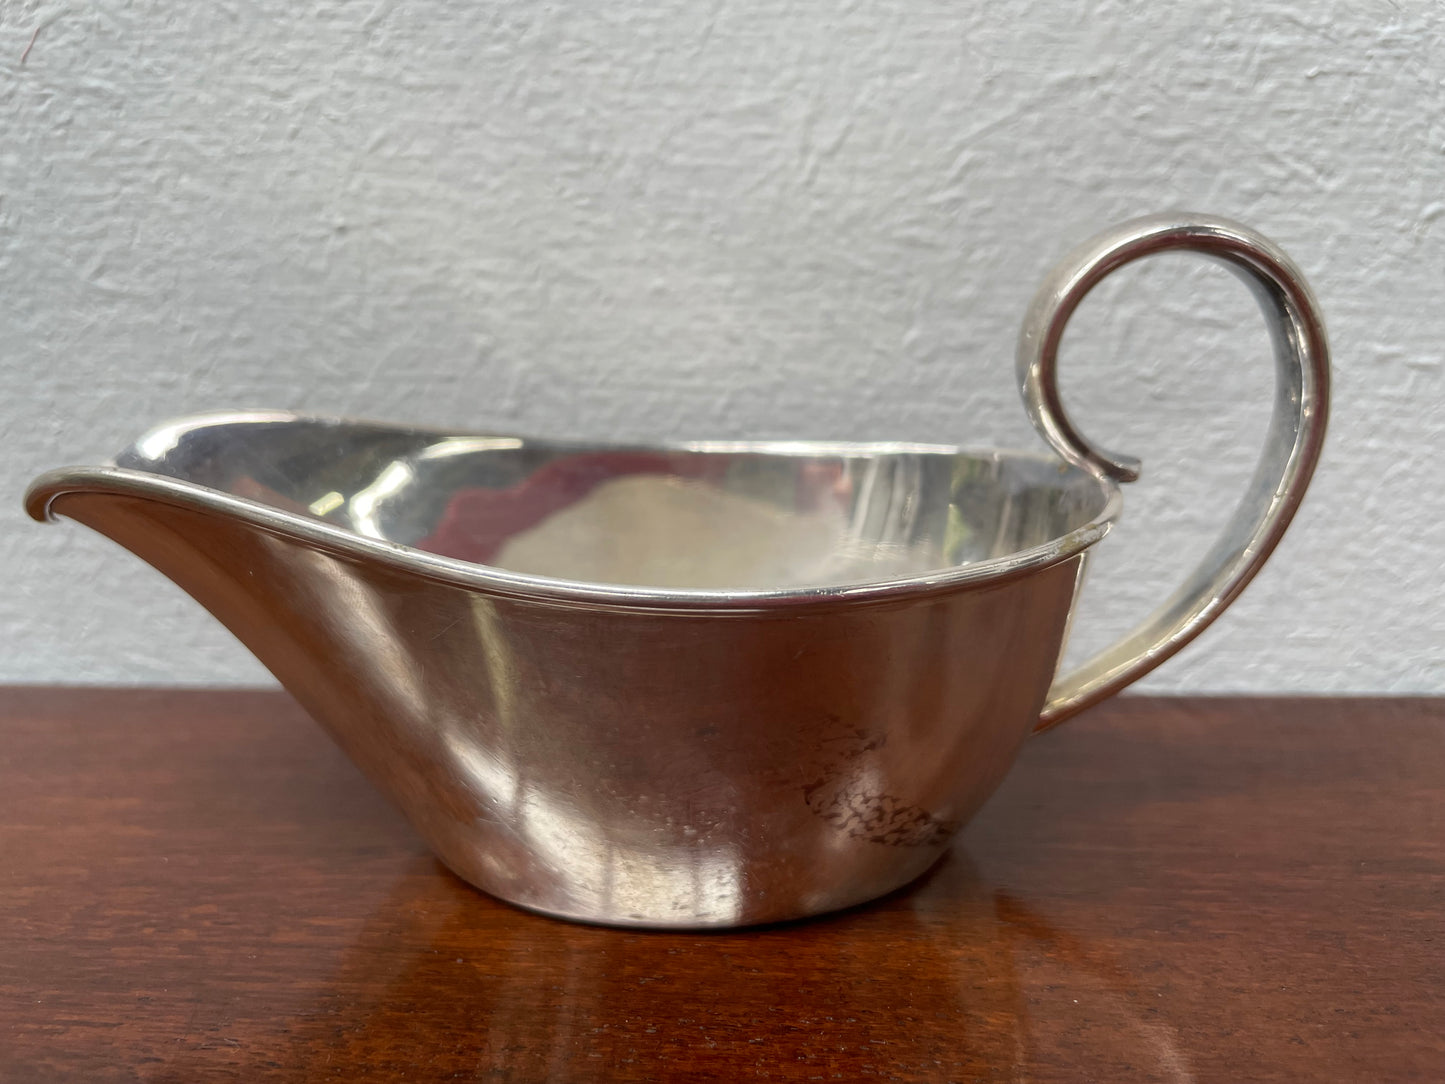 Petite vintage gravy pot with stamp/mark on the base. It is in good original condition. Please see photos as they form part of the description.